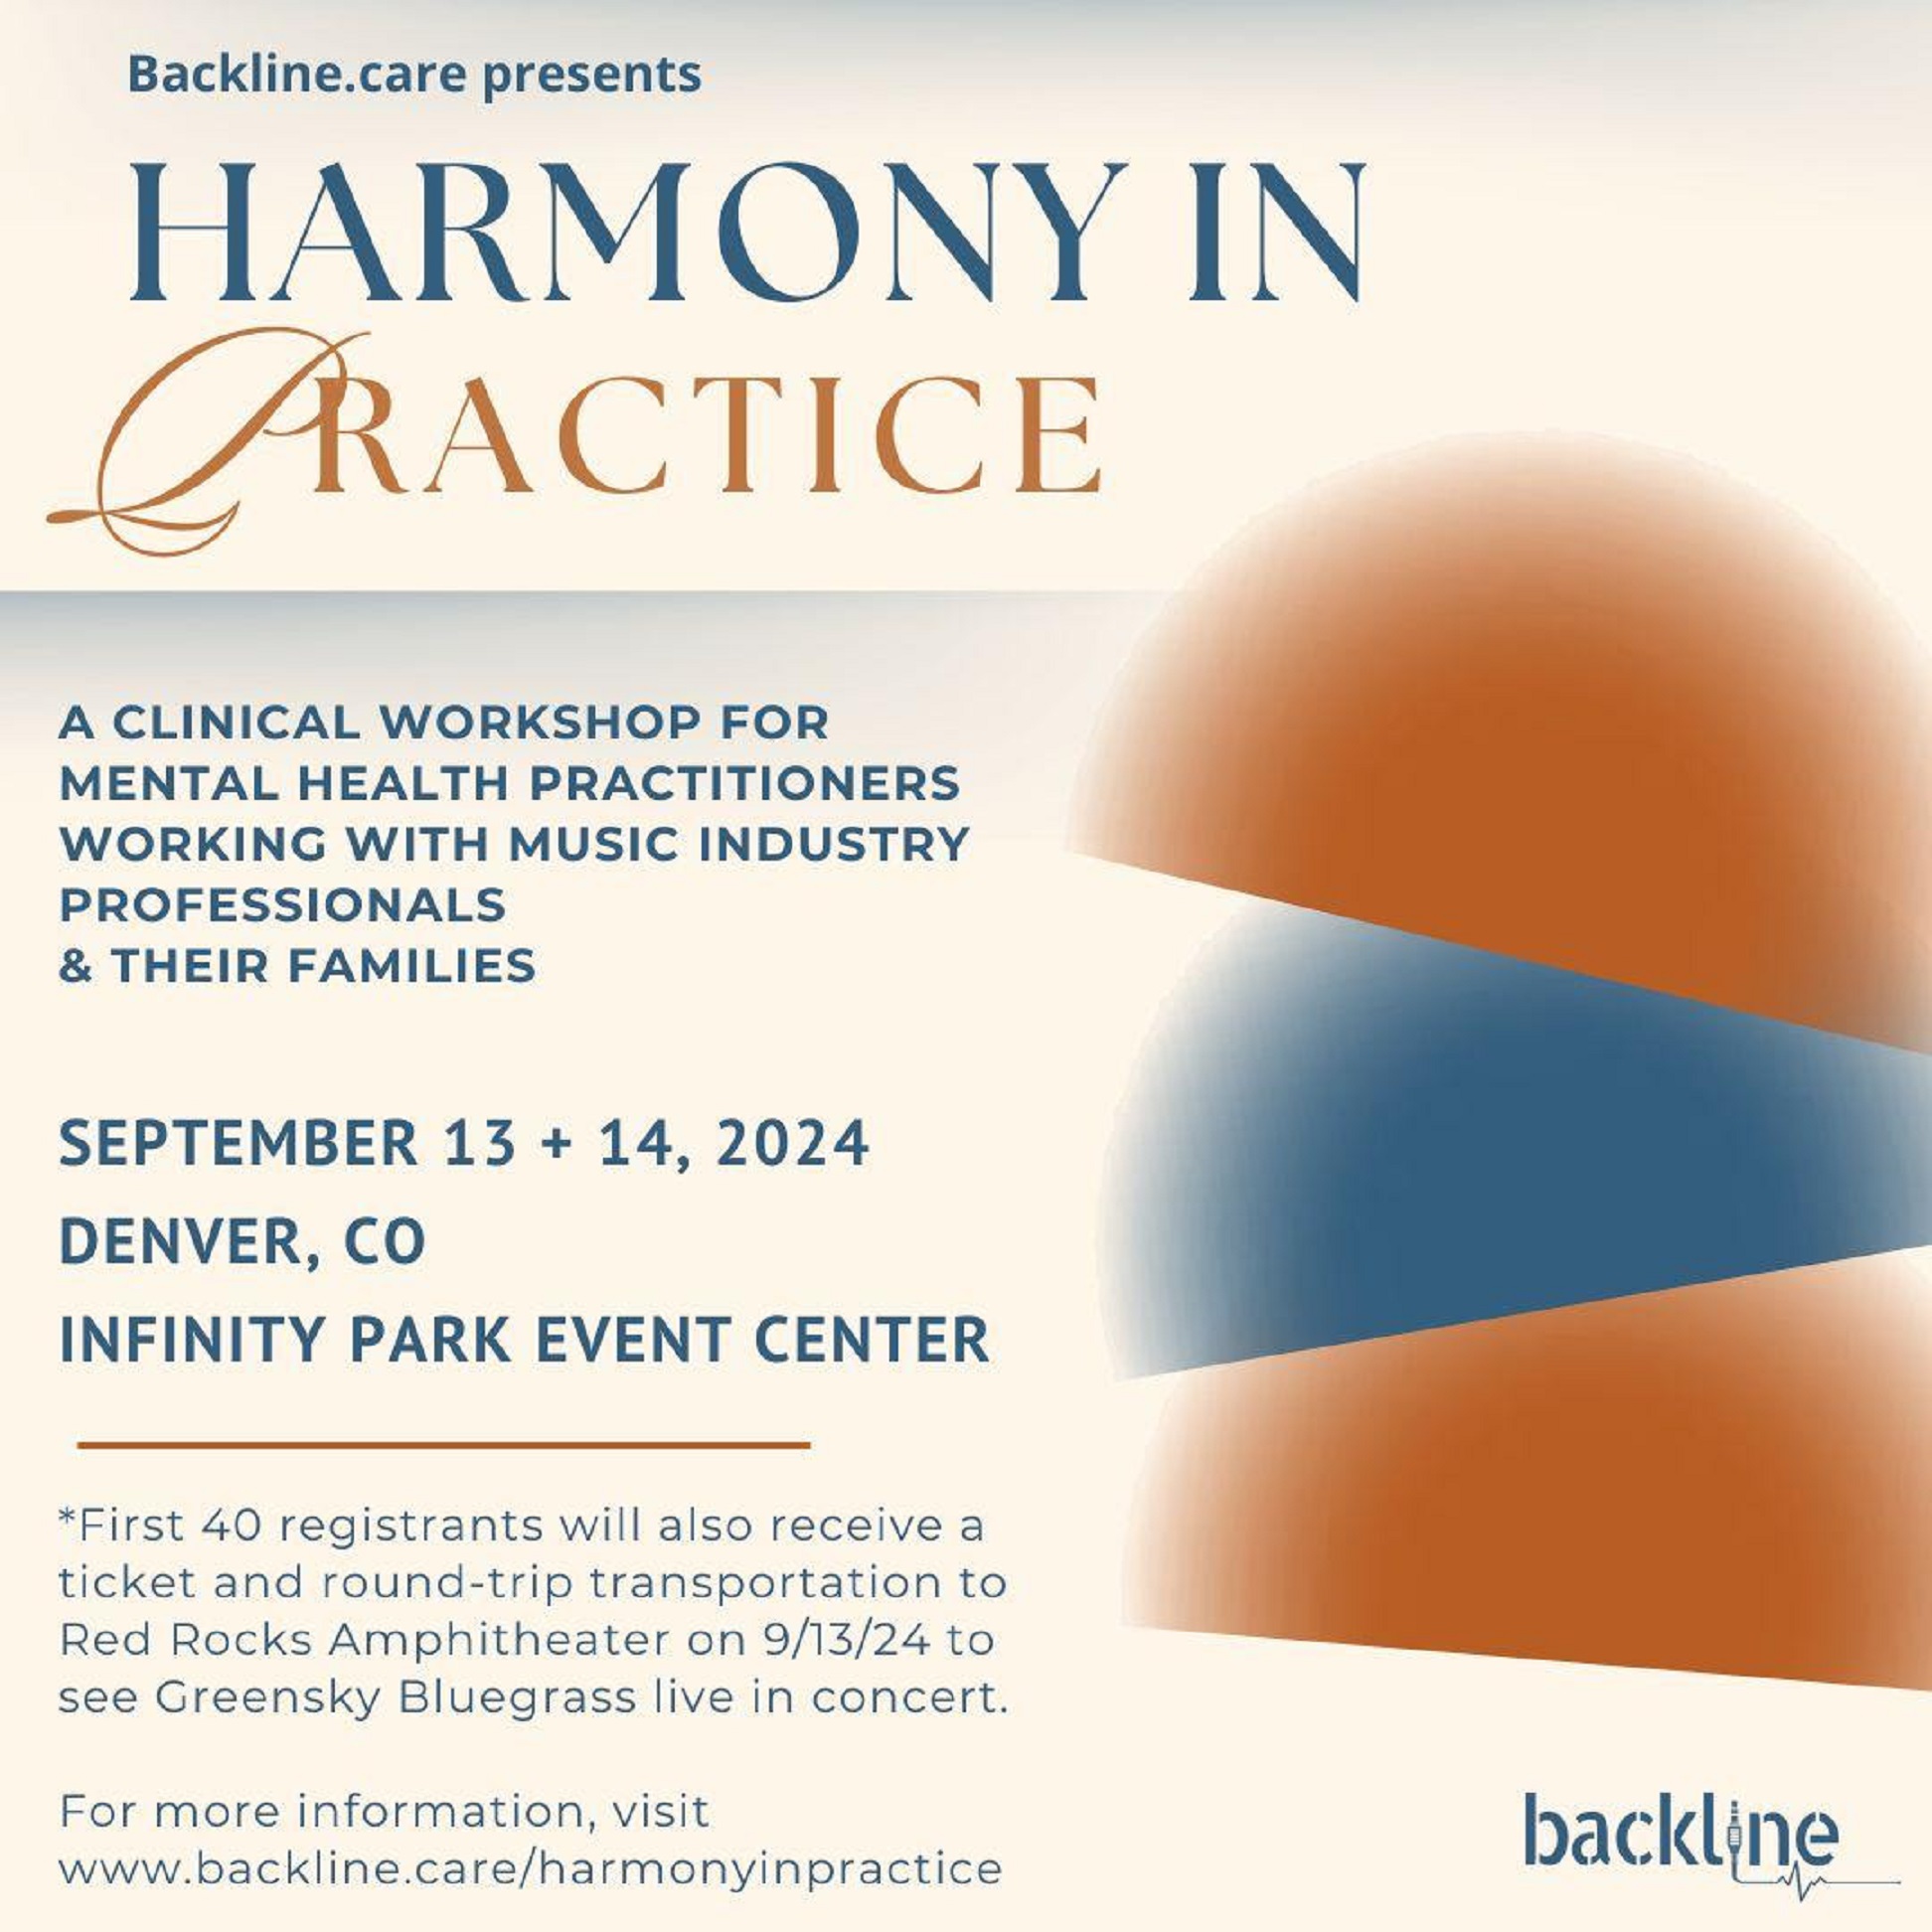 Backline announce Harmony in Practice clinical workshop for mental health in the music industry: Sept 13-14 in Denver, CO